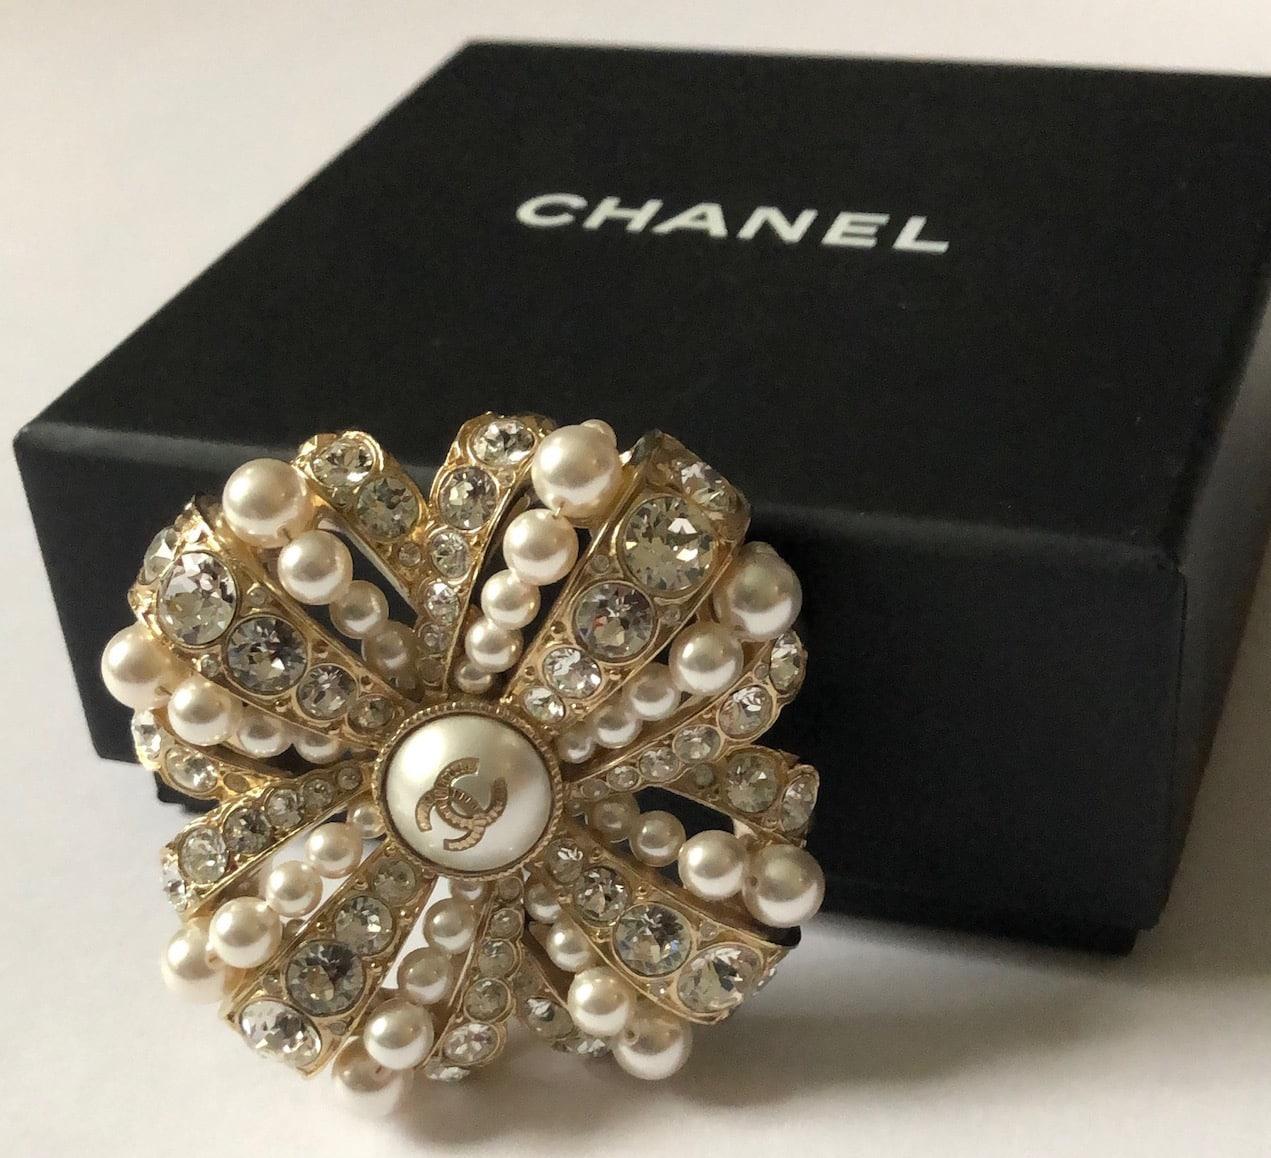 CHANEL Brooch CC Logo Pearl & Crystals Pin W/Box
A stunning Chanel brooch Autumn 2020 collection, in gold metal enhanced with crystals and creamy faux pearls. This brooch is inspired by a military medal decoration. It is in perfect condition,